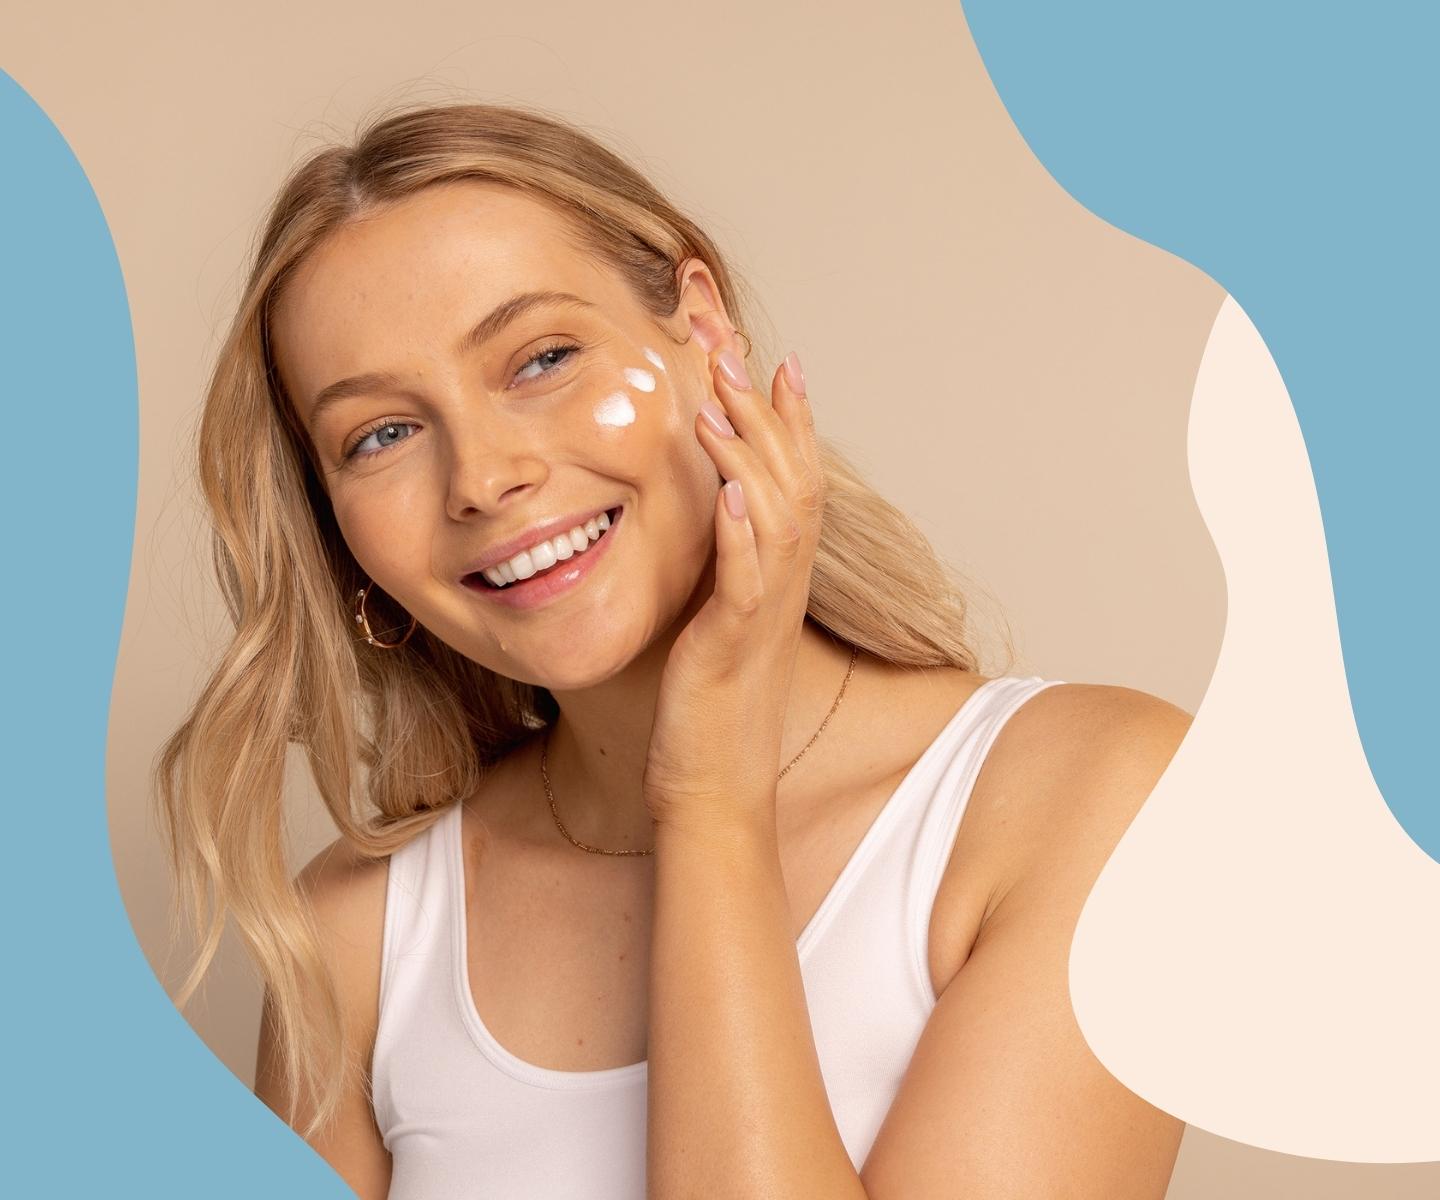 The Ultimate Guide to Your Best Summer Skin and Summer Makeup - model applying cream on her cheek